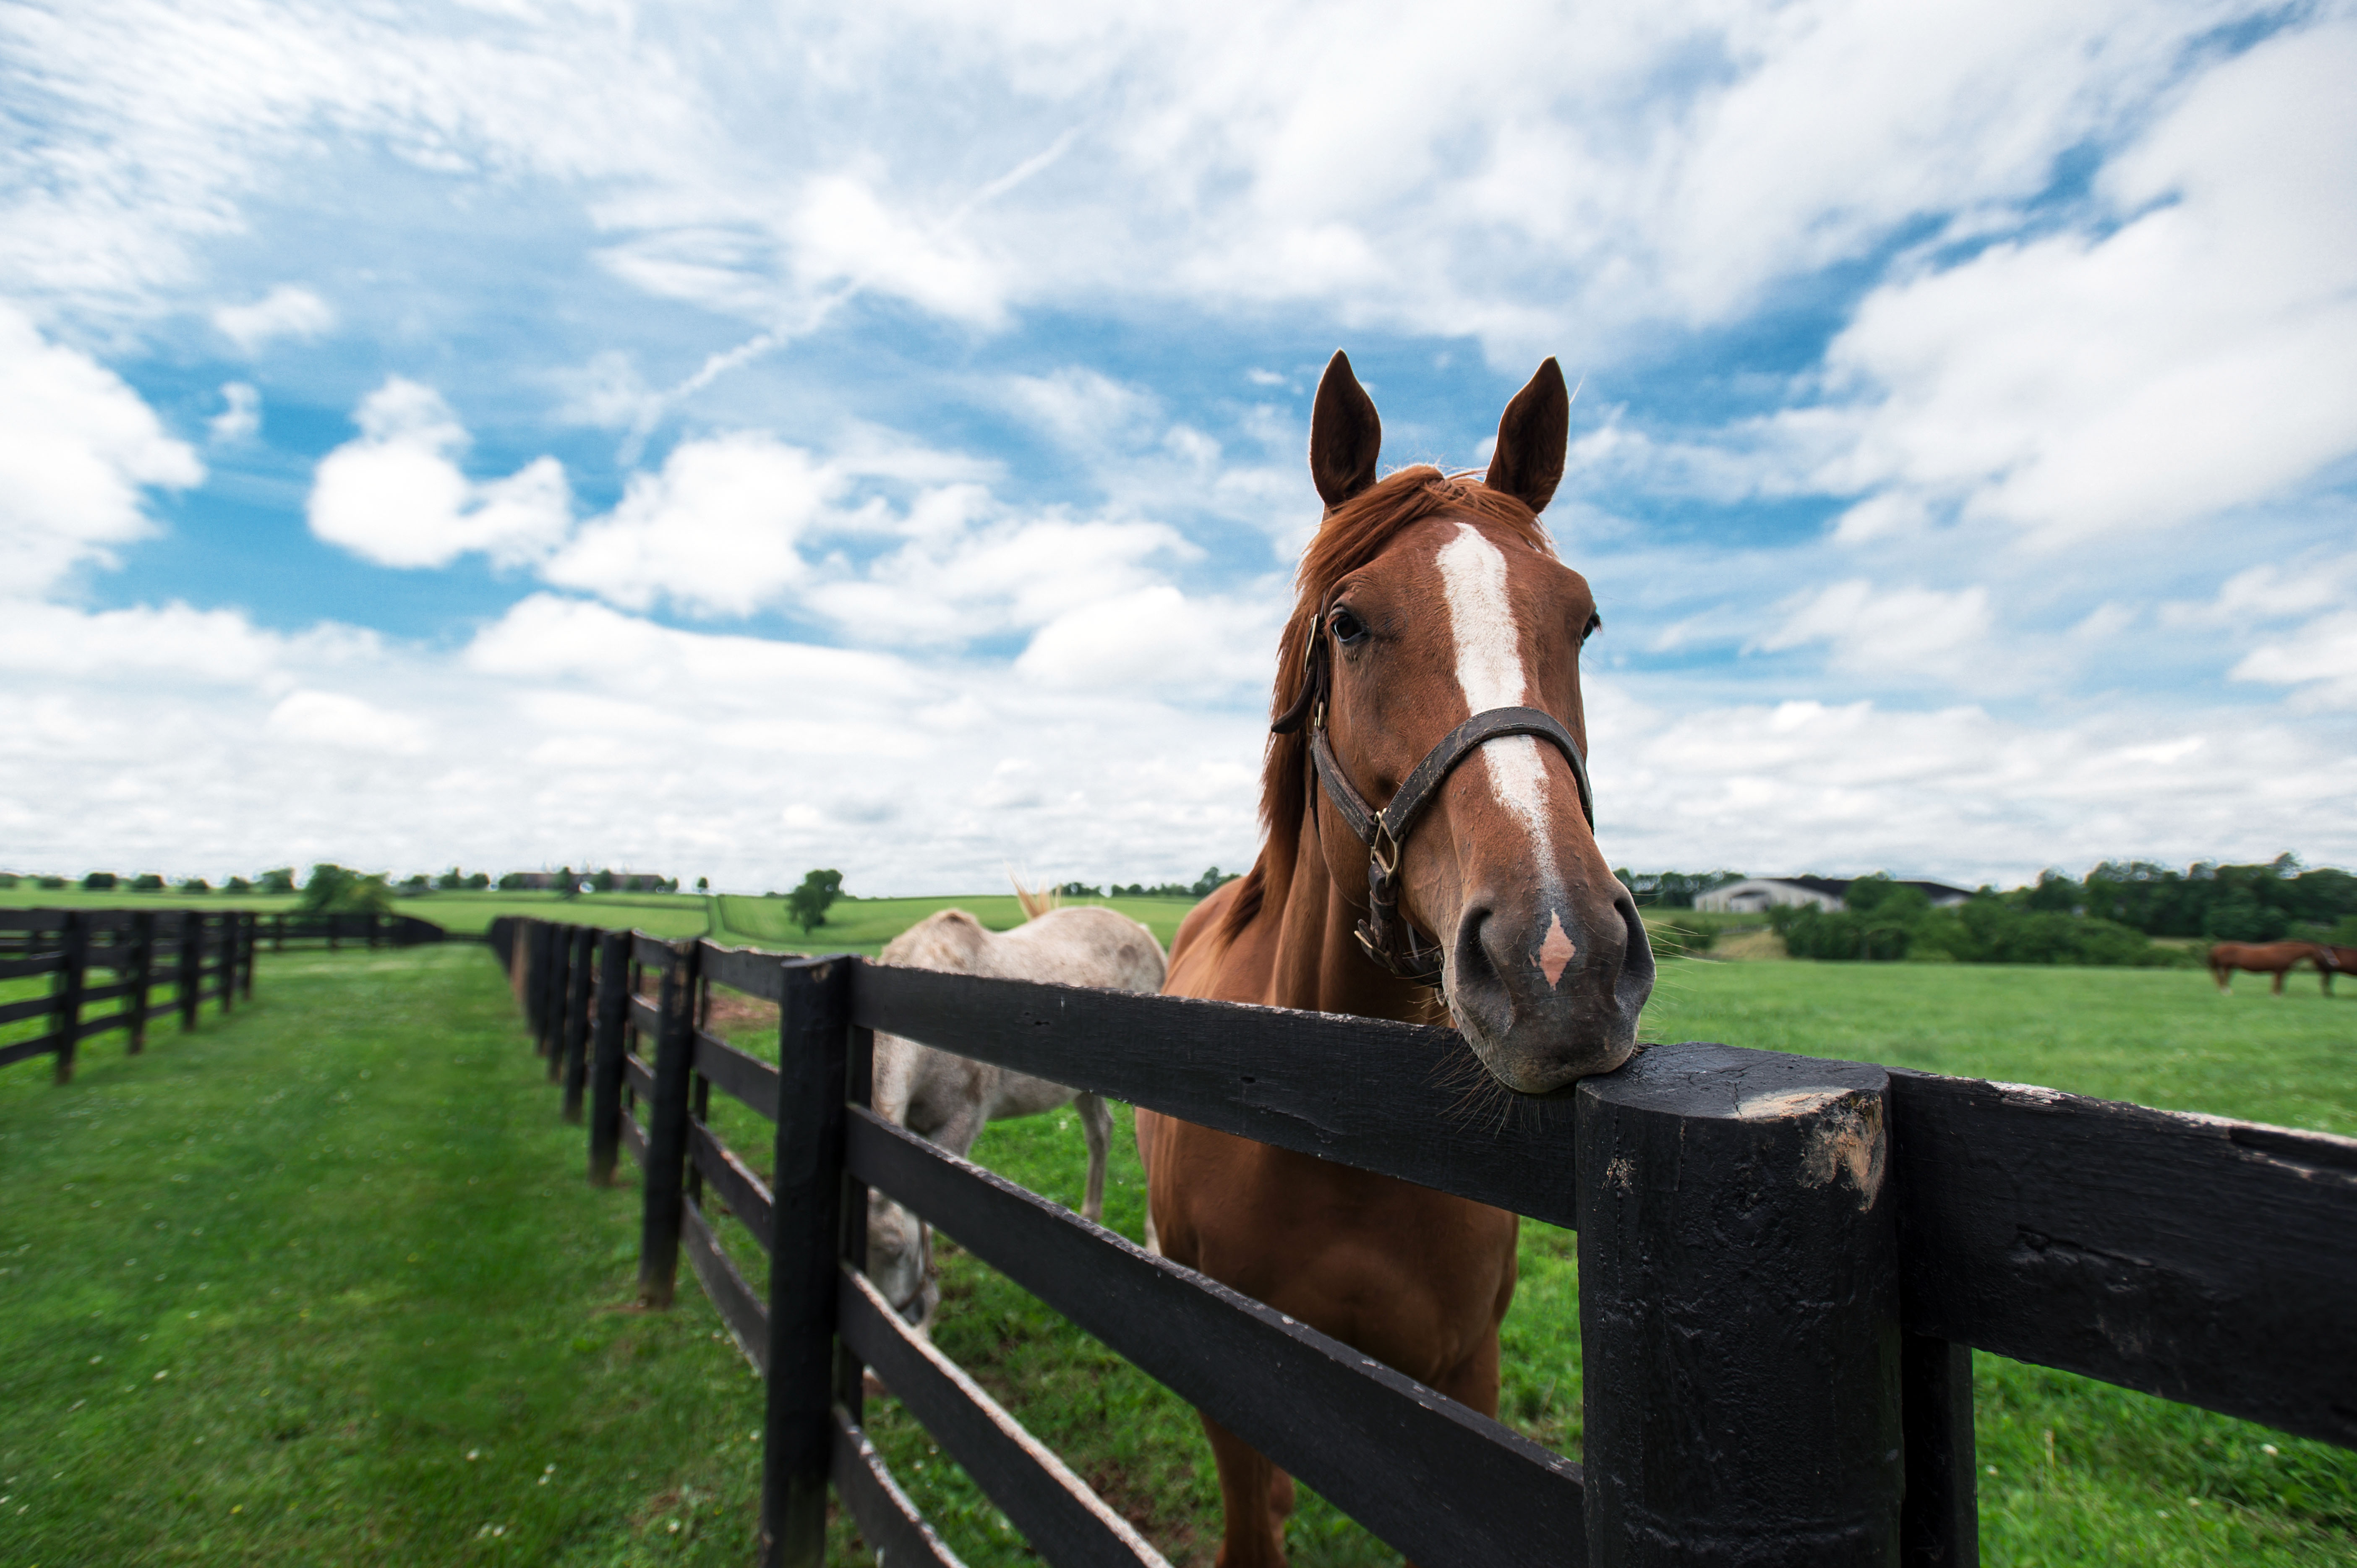 Brown horse standing behind a black fence with sunny skies